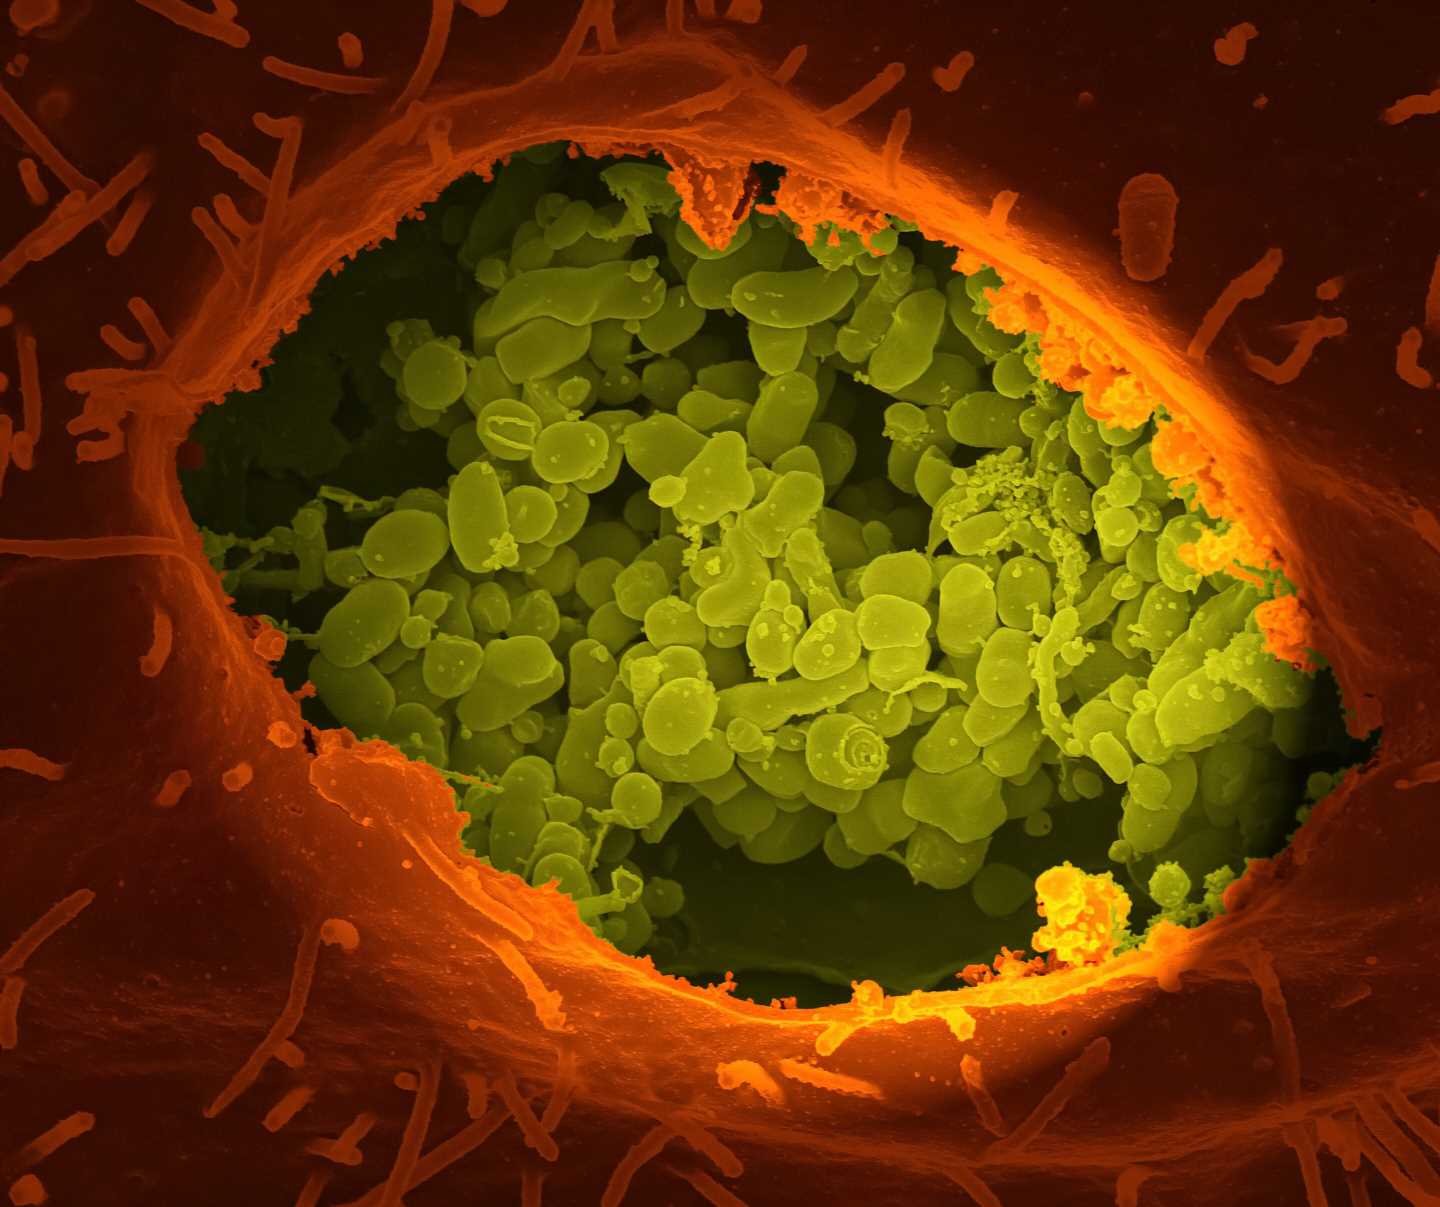 Some viruses that cause cancer suppress the immune system with help from common bacteria